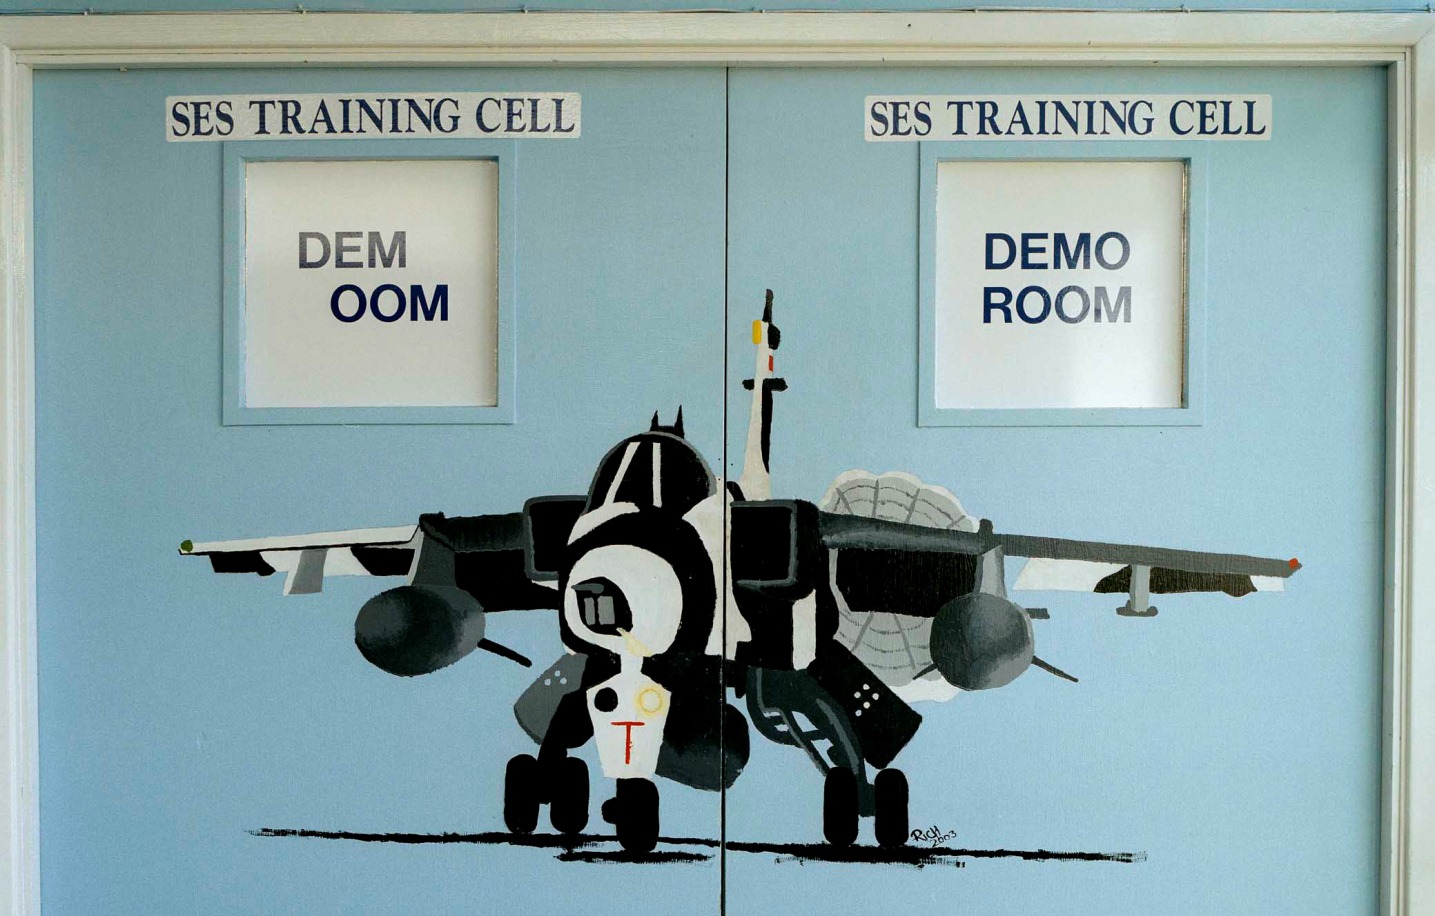 RAF Coltishall, Norfolk, a painting of a Jaguar aircraft in winter camouflage on a door.